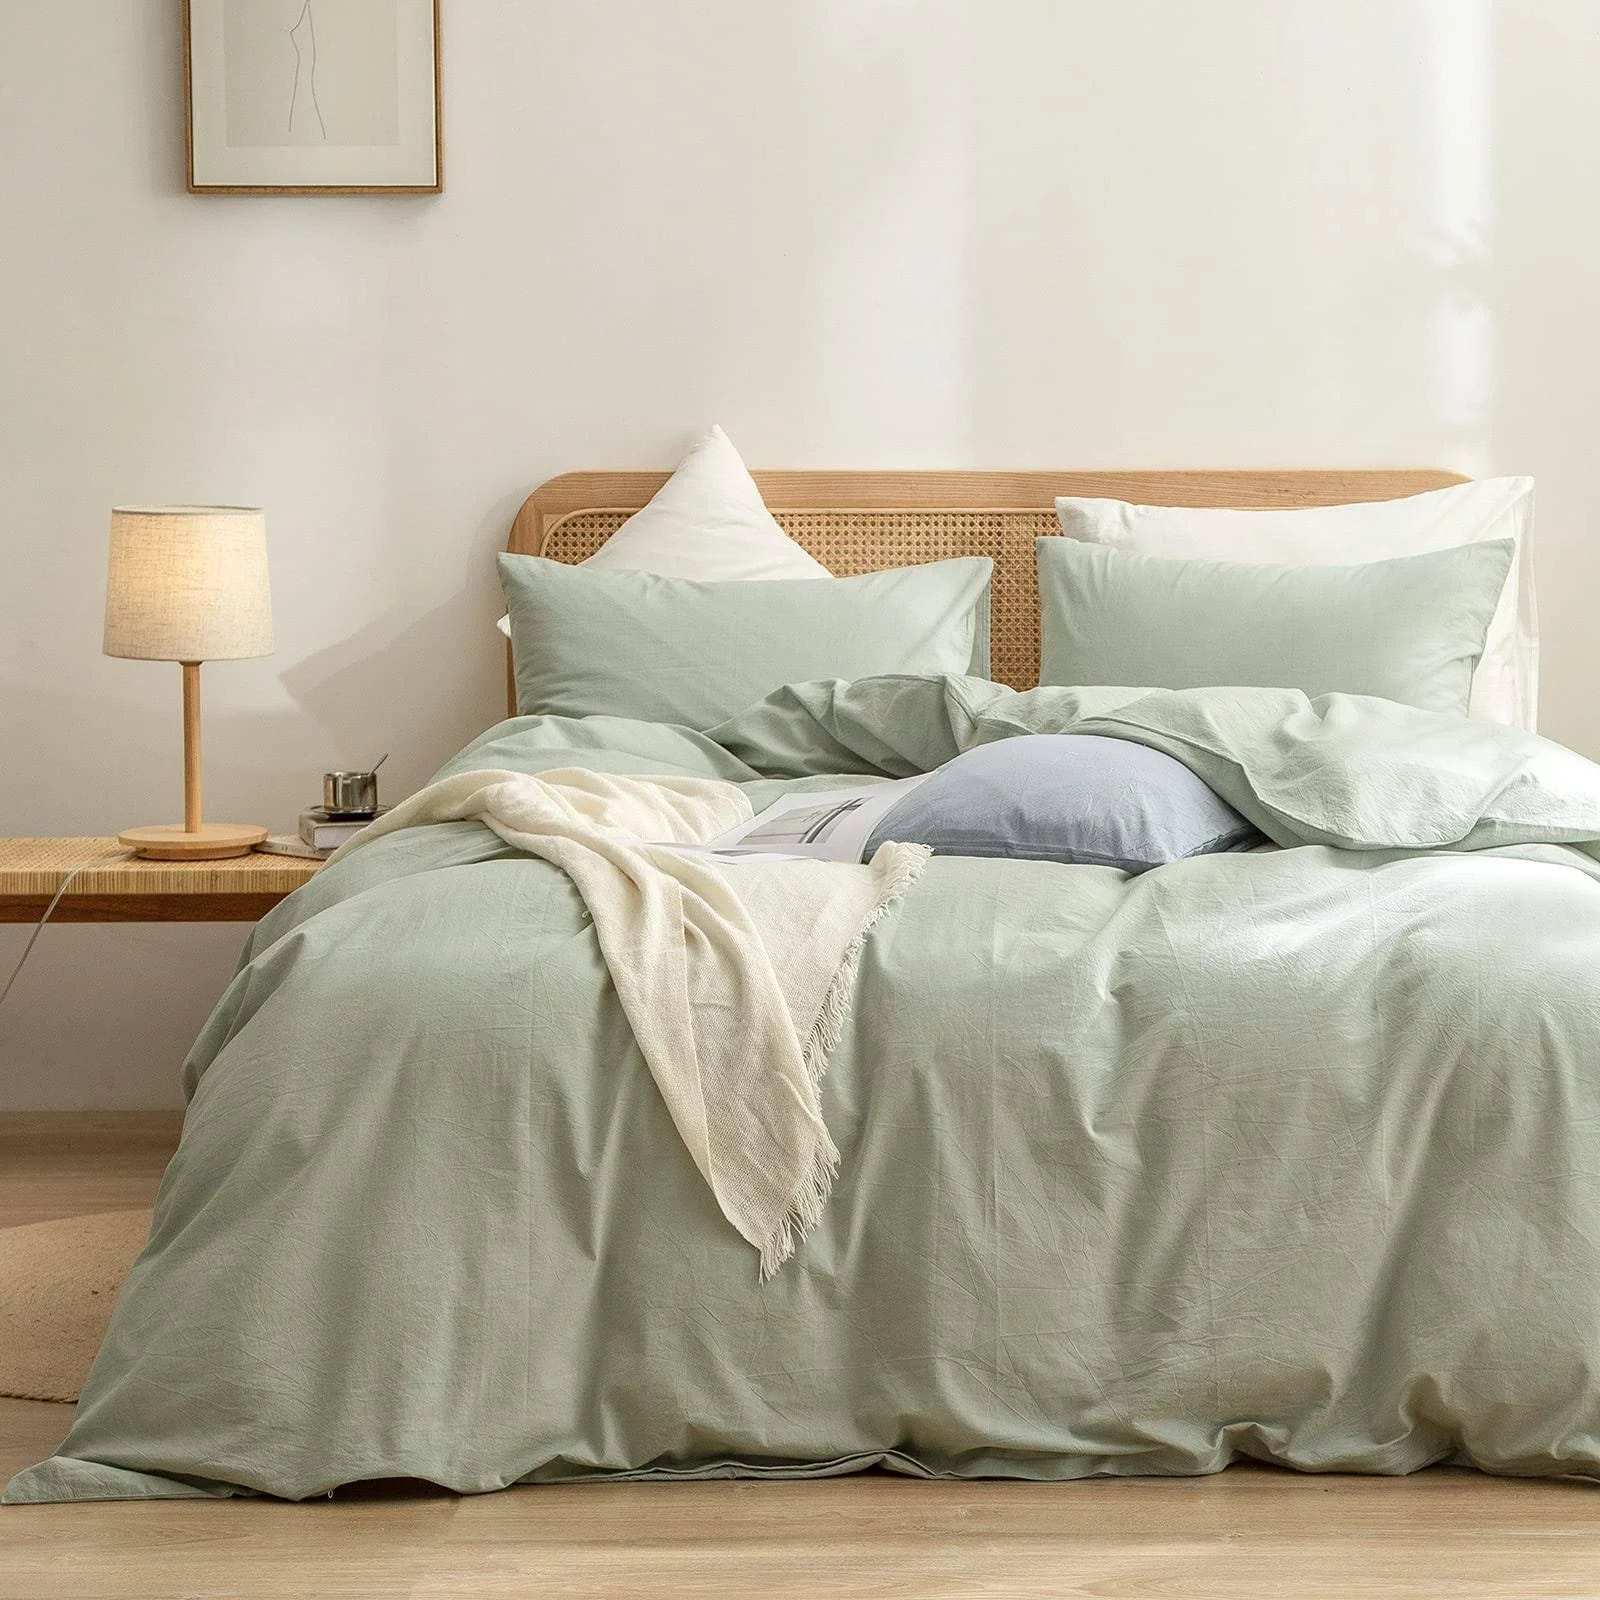 Soft and Comfortable Duvet Cover Set in Sage Green | Image